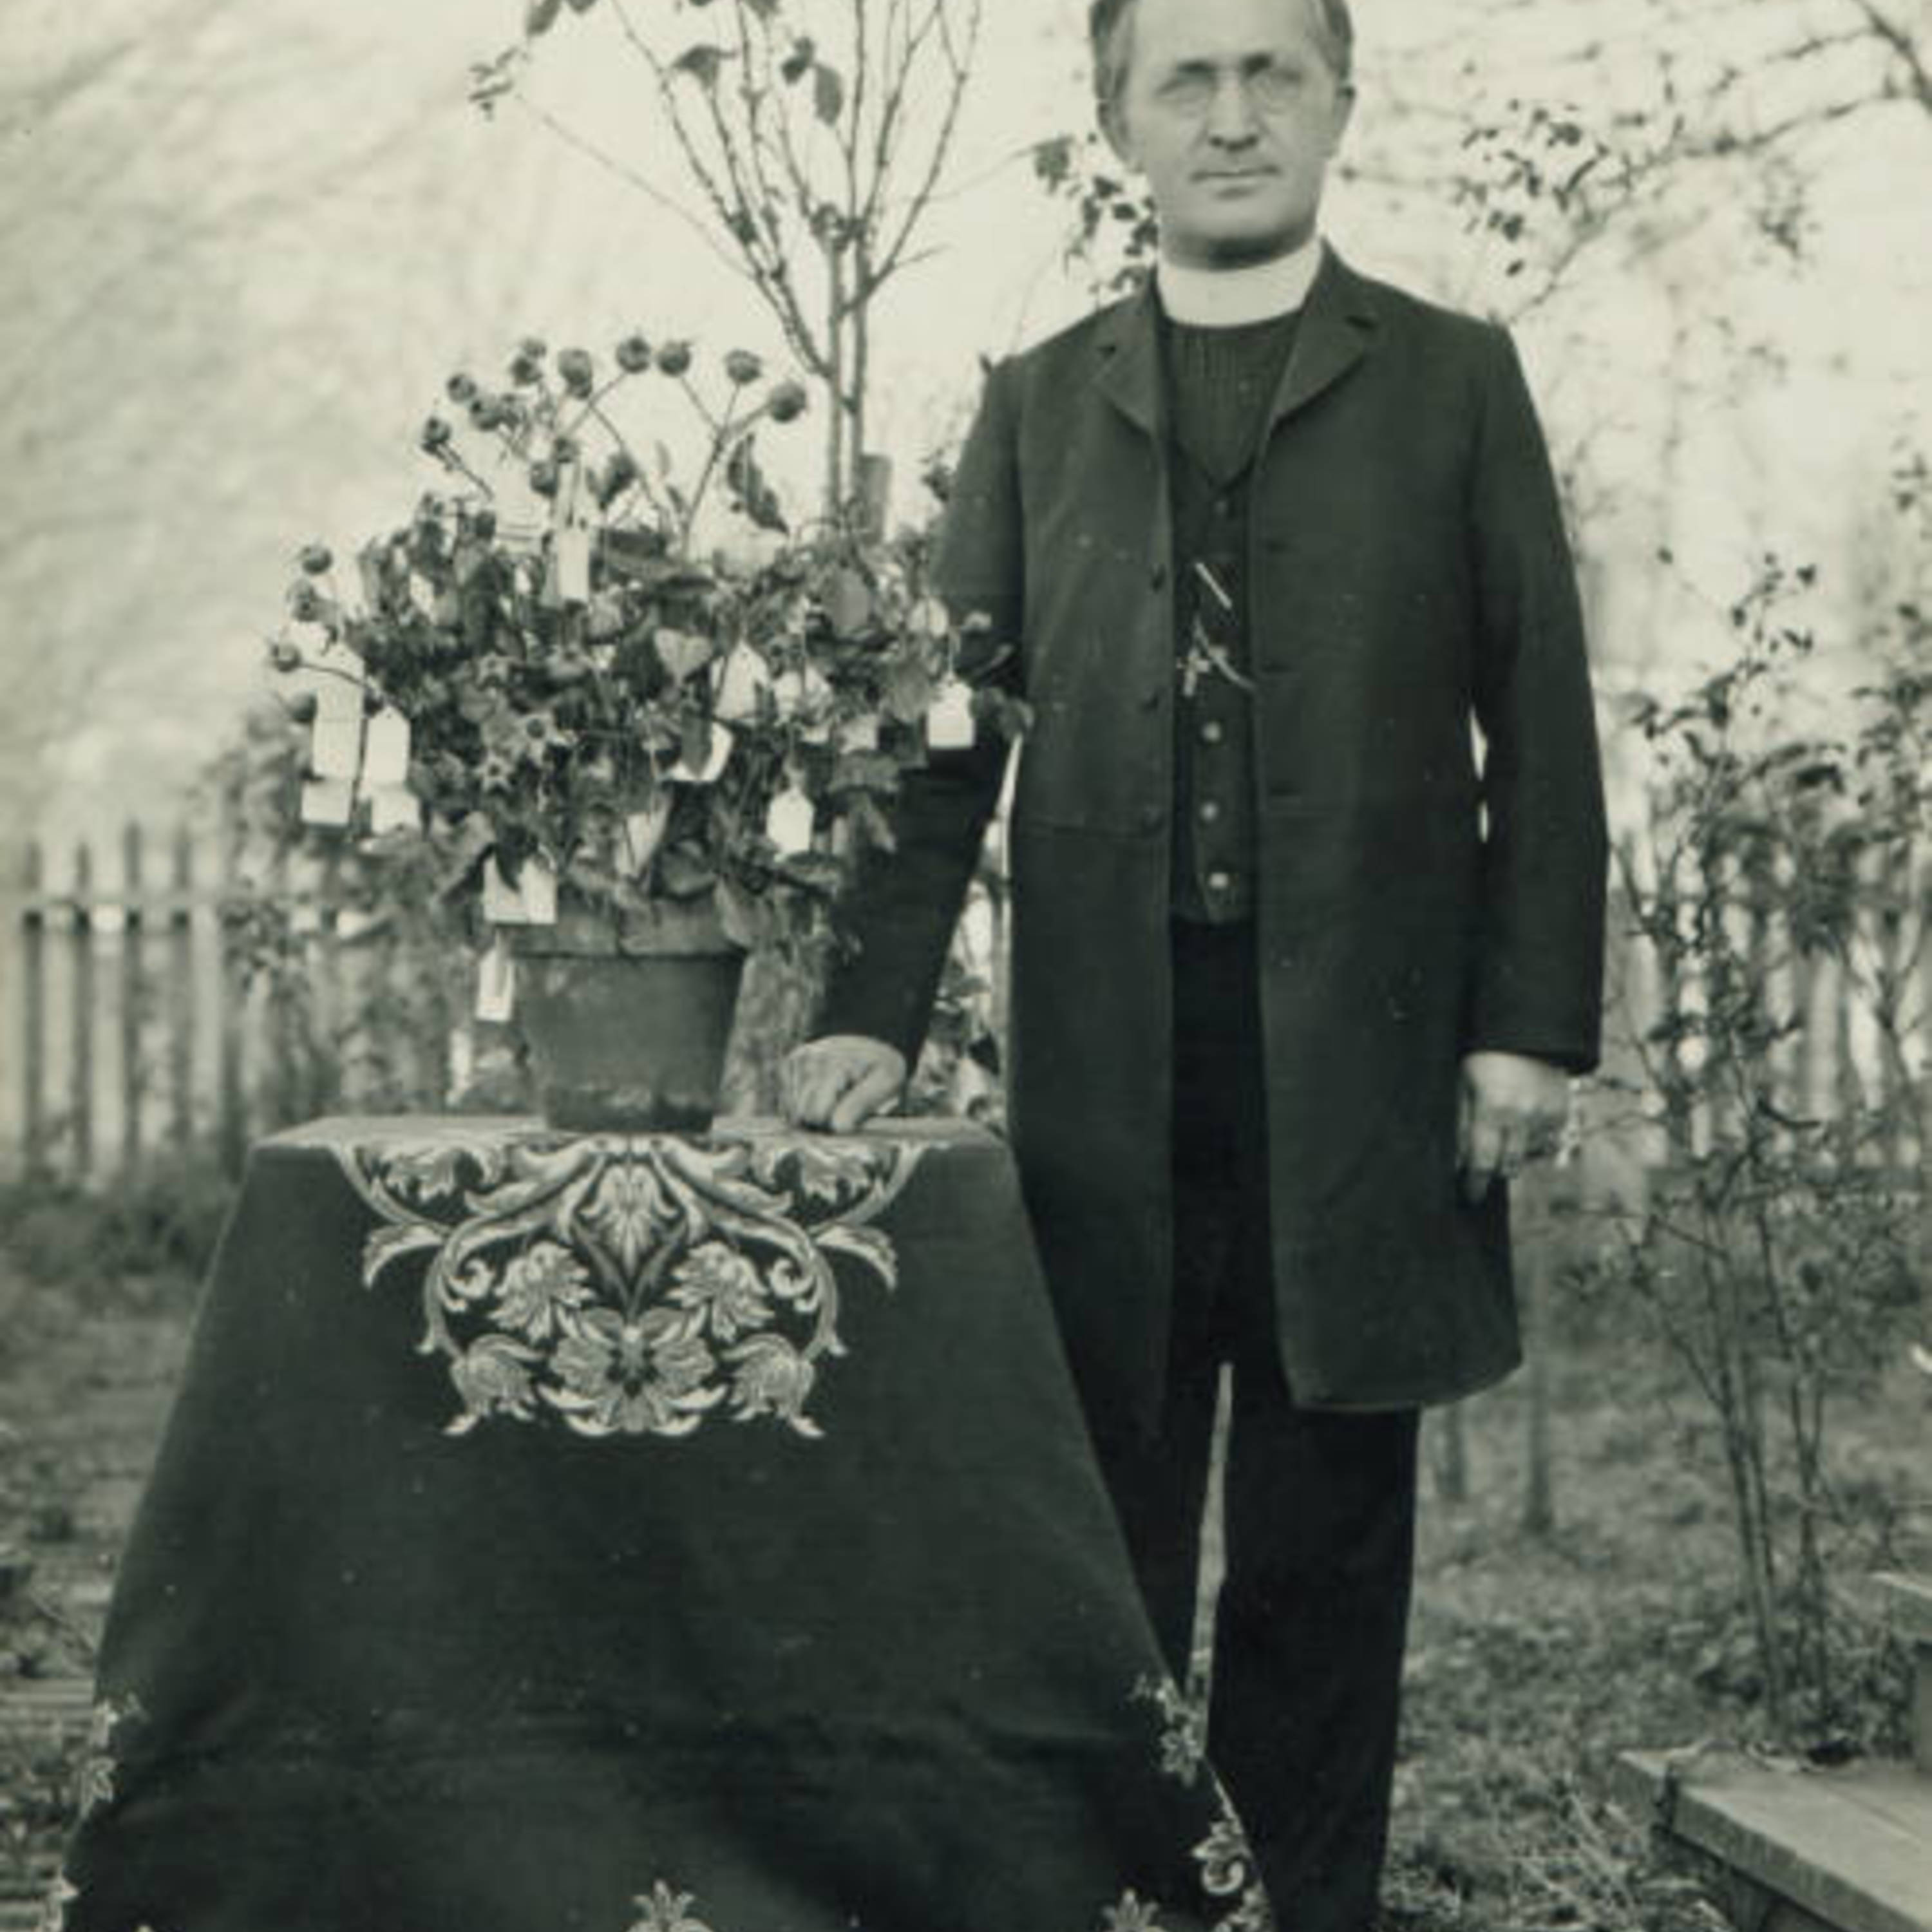 Father Schoener and Hybridized roses